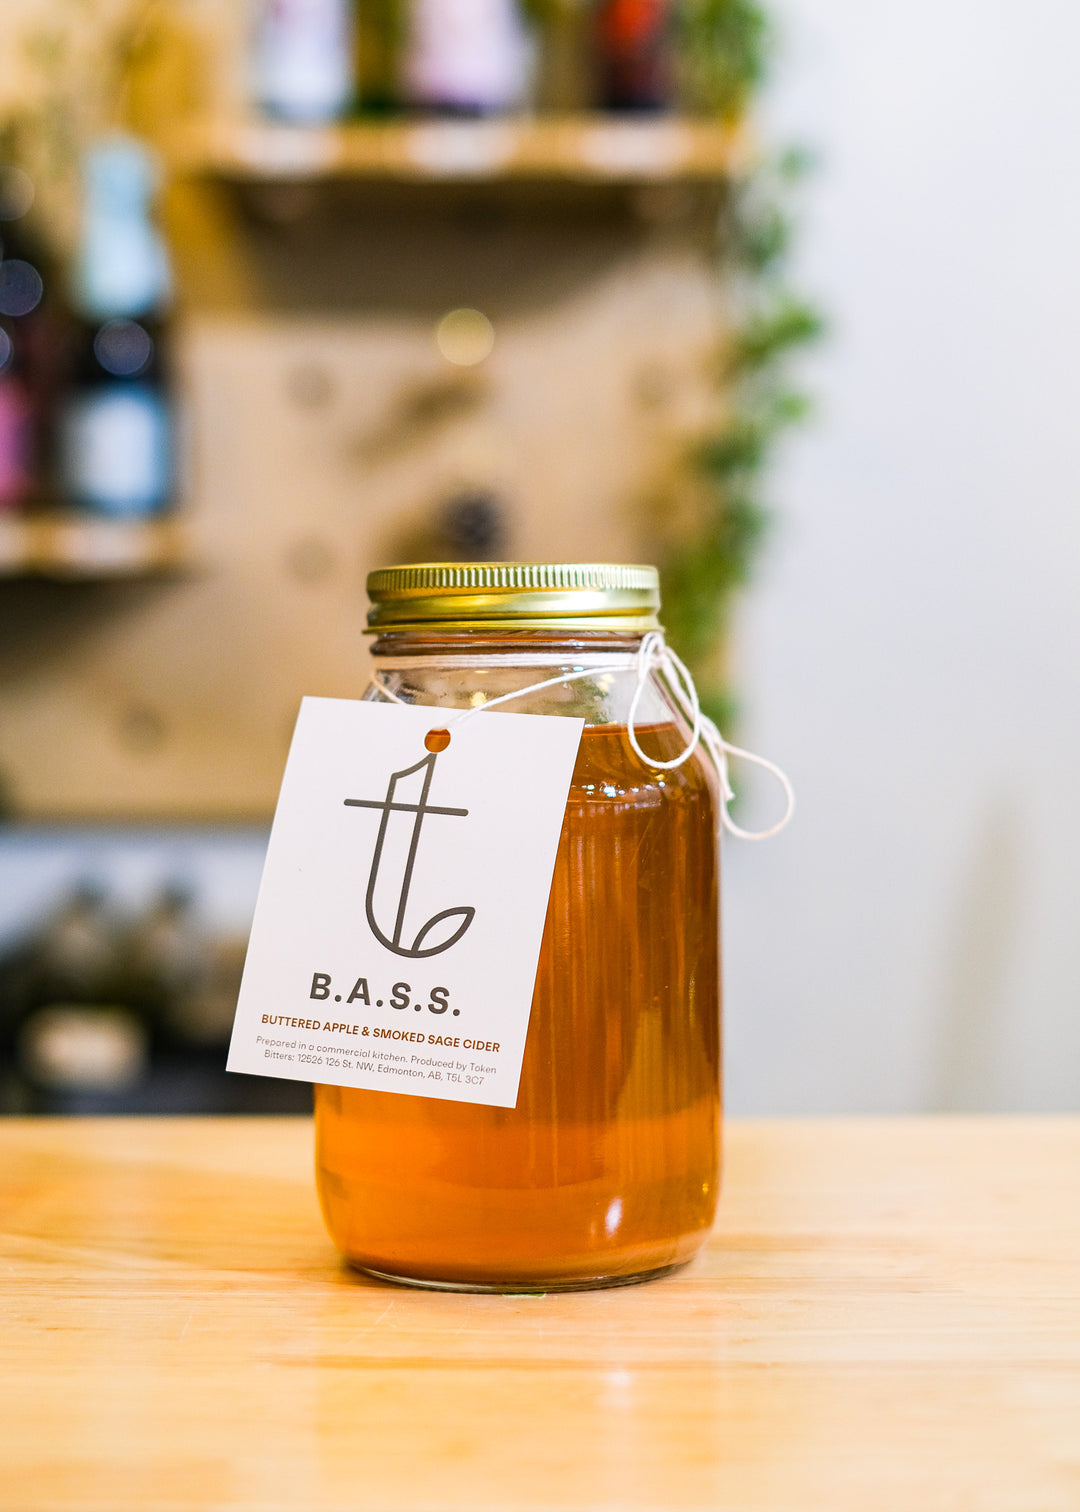 B.A.S.S. | Buttered Apple & Smoked Sage Cider(Non-Alcoholic)